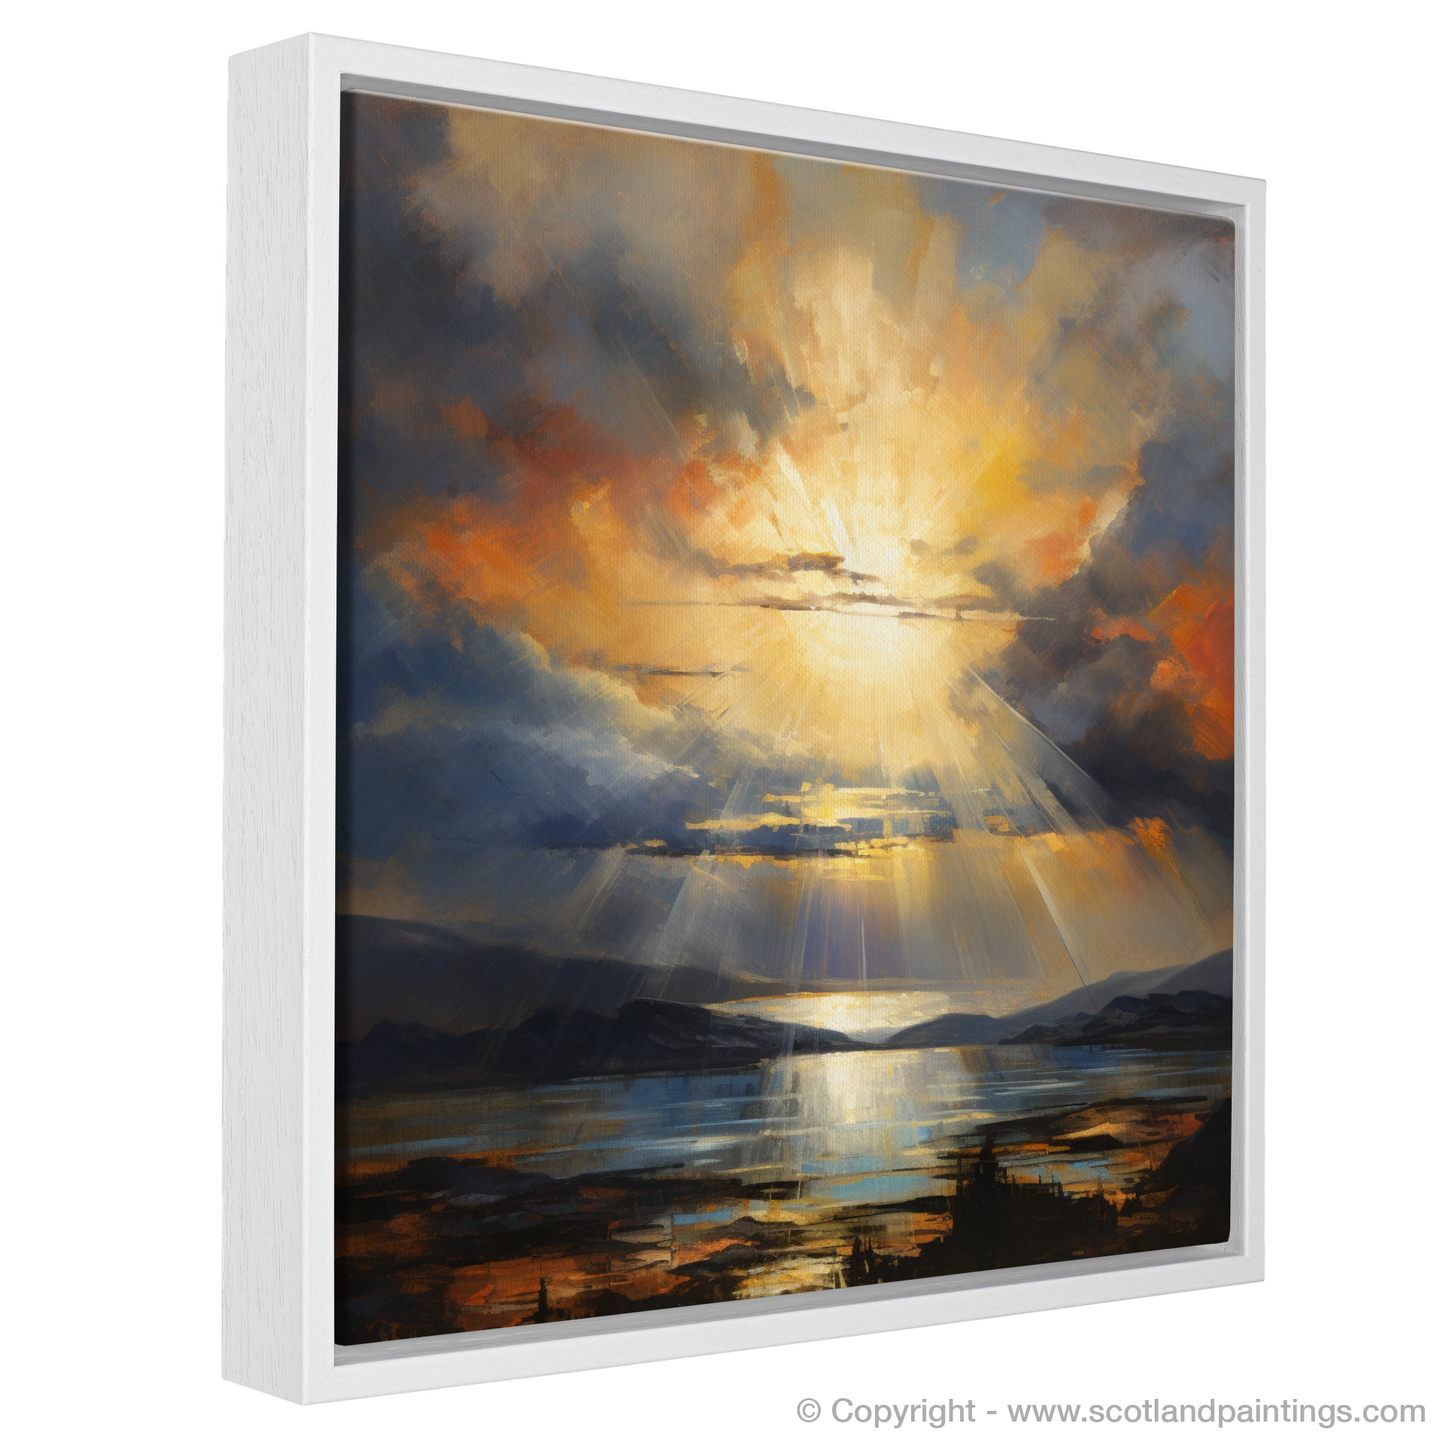 Painting and Art Print of Crepuscular rays above Loch Lomond entitled "Crepuscular Majesty: An Abstract Ode to Loch Lomond".